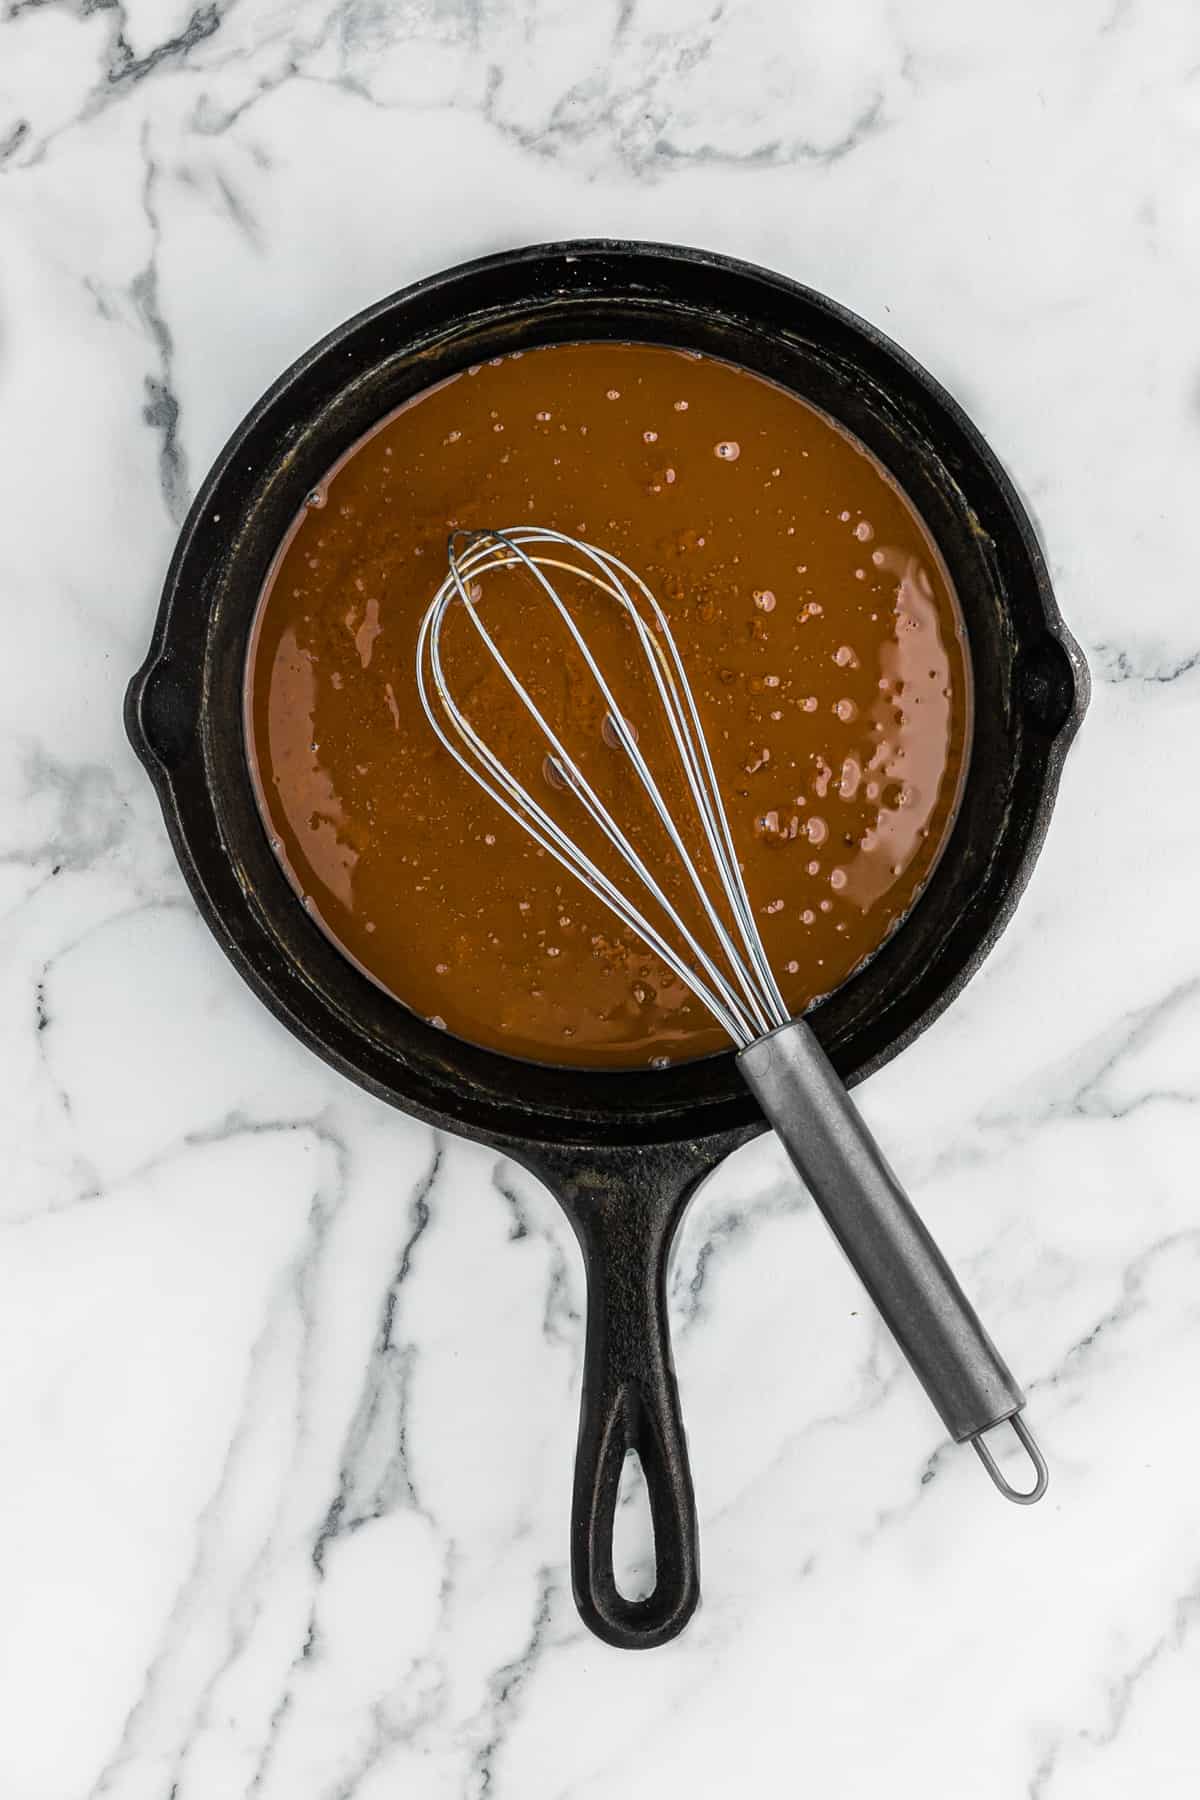 A whisk in a cast iron skillet of a finished sauce